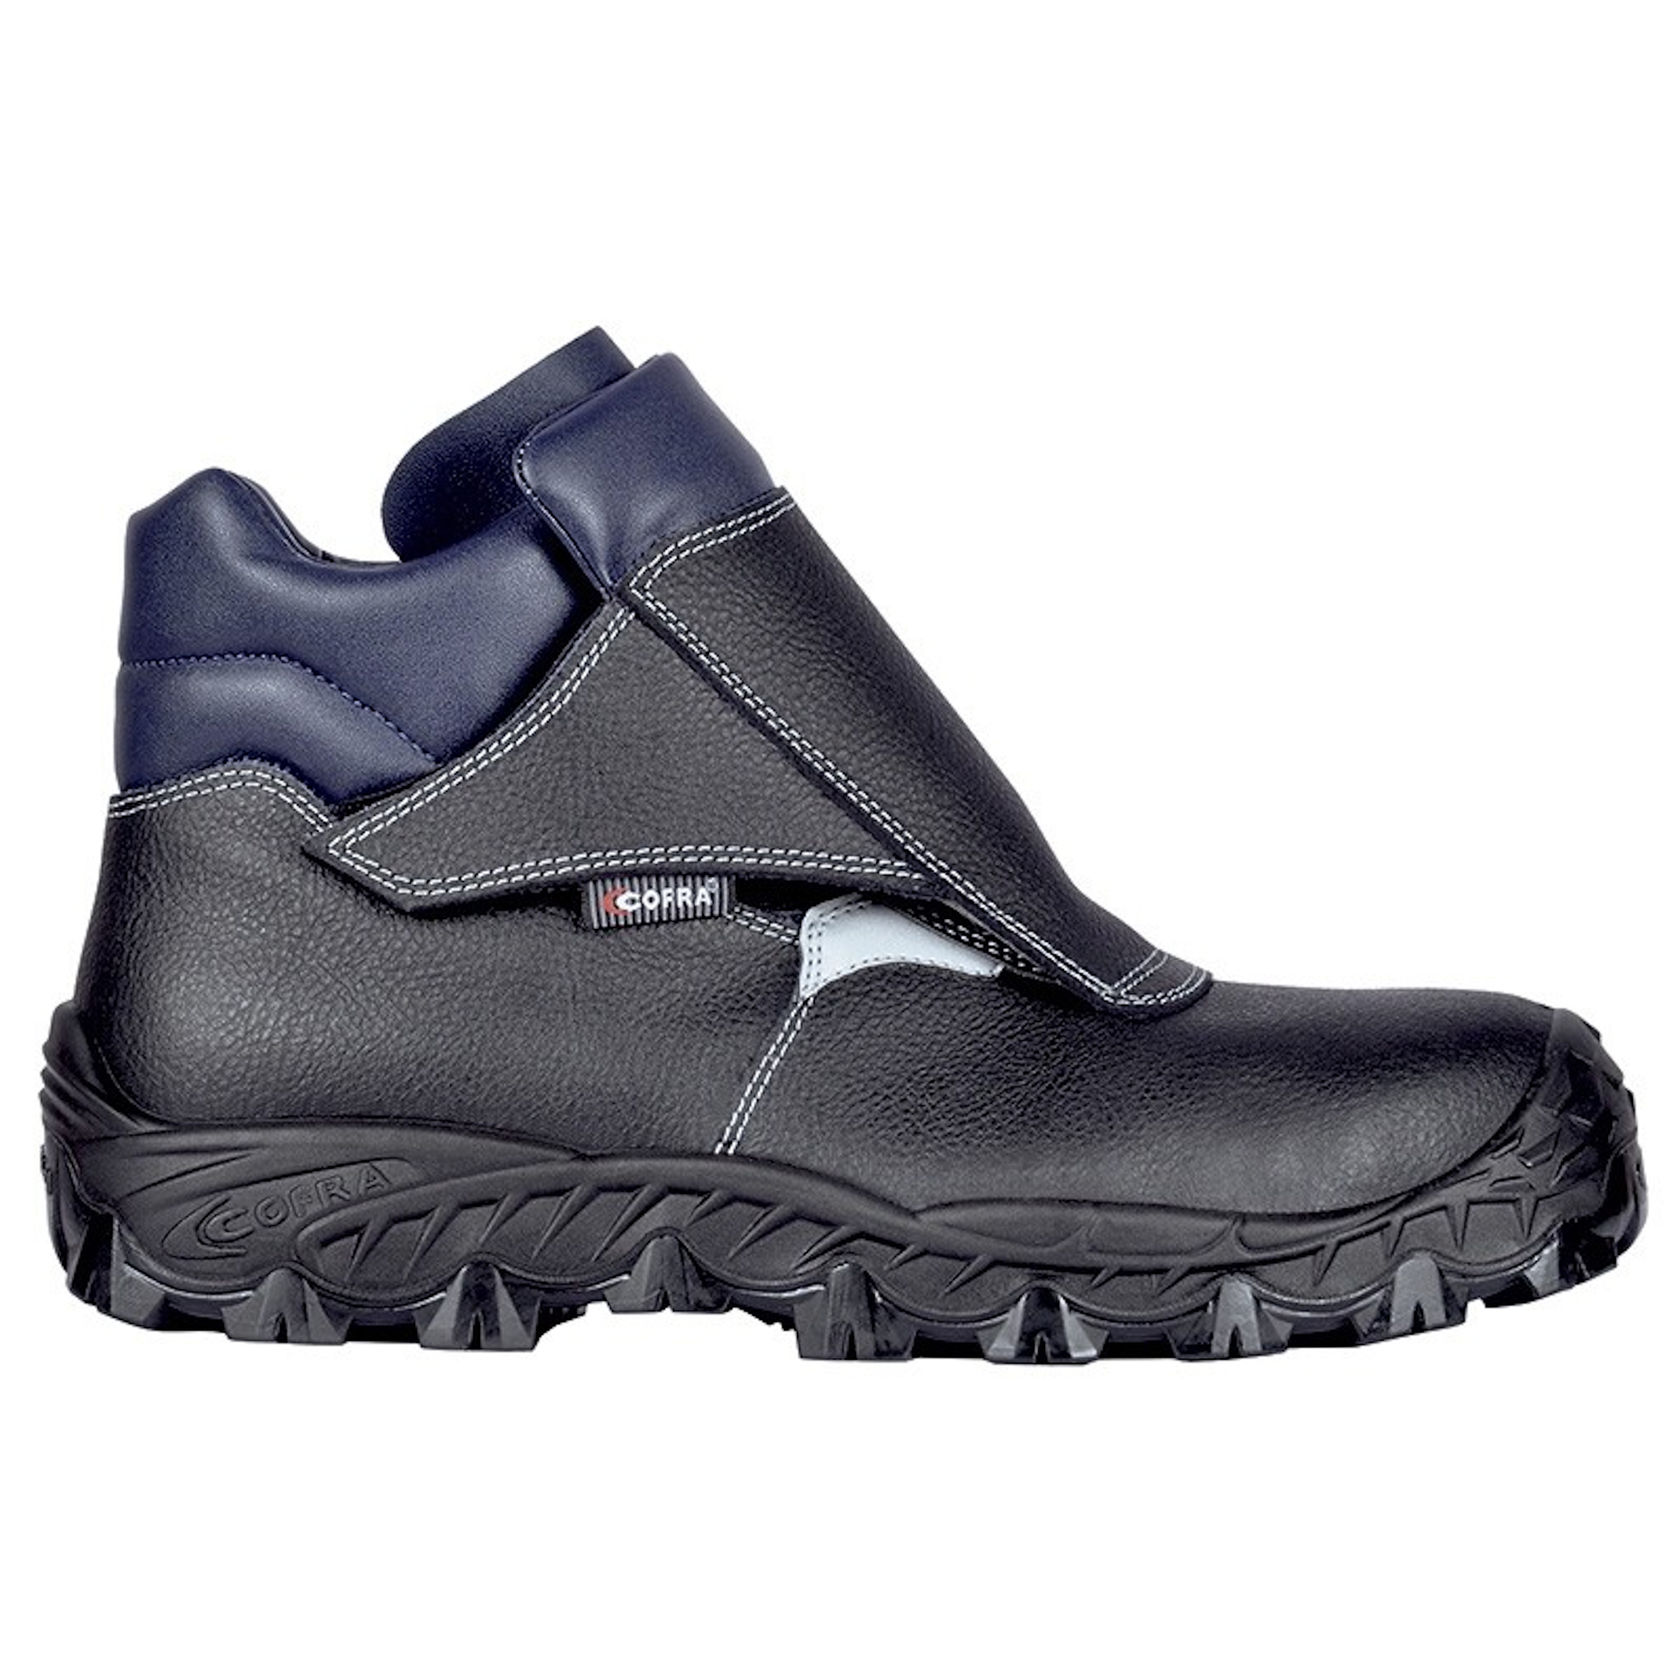 Cofra Welder BIS Welders Safety Boots Size 8 UK Personal Protective ...